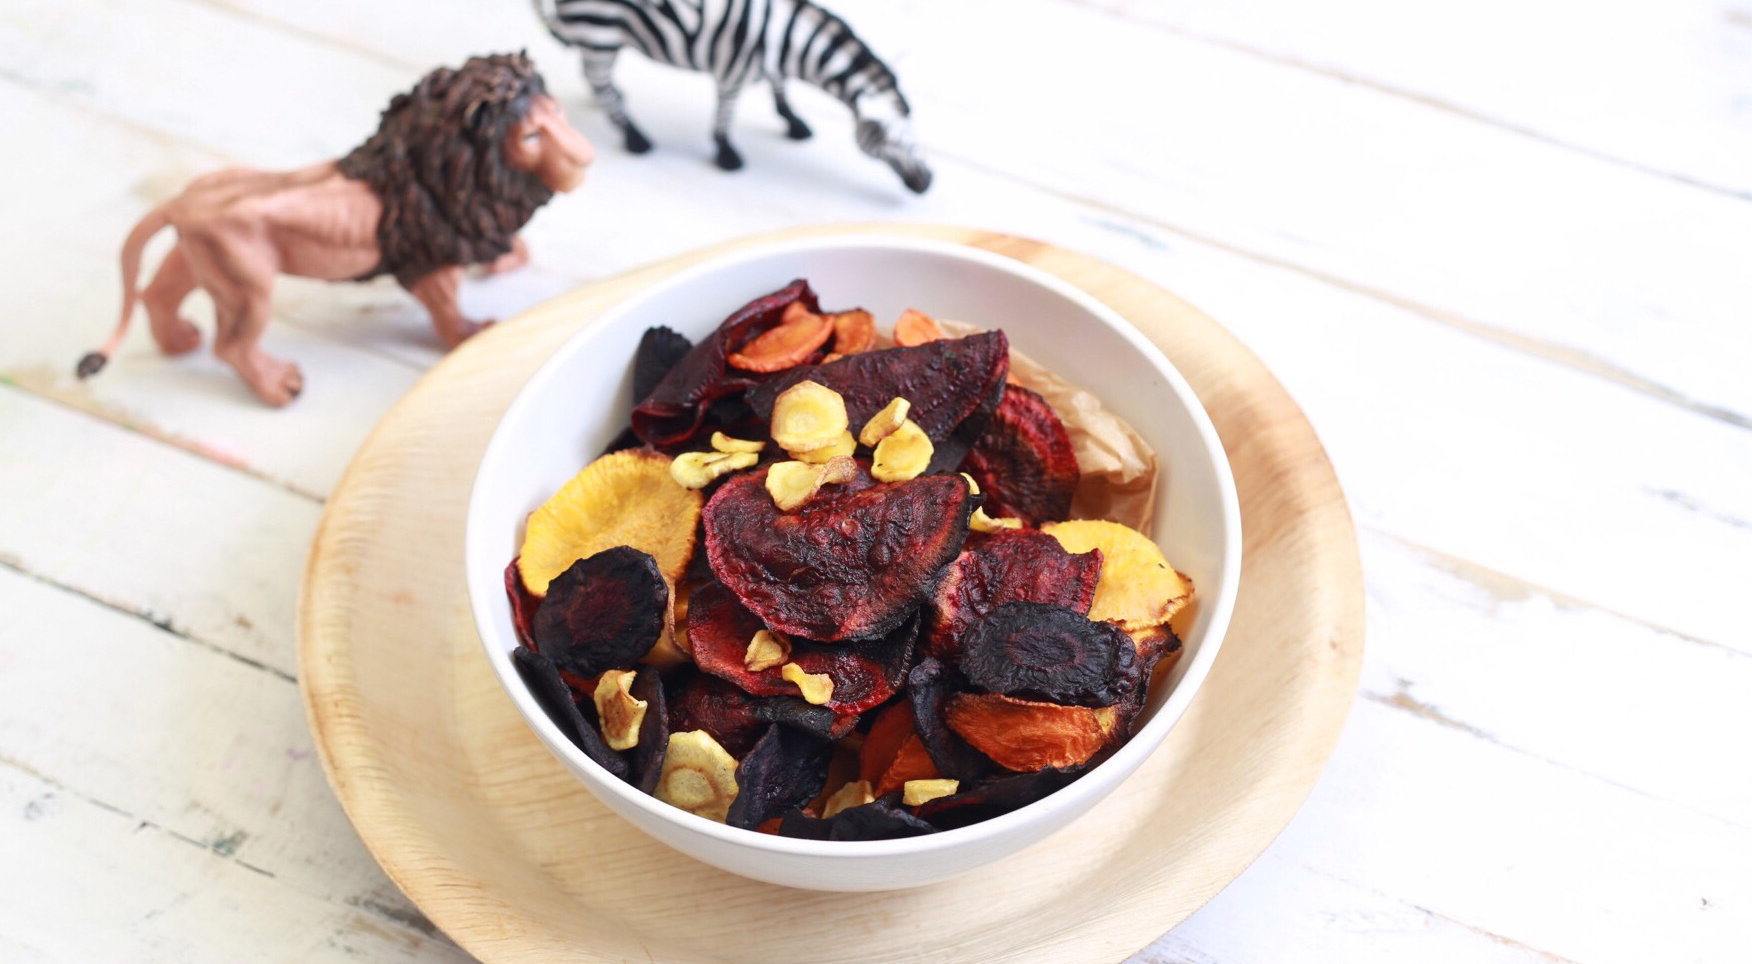 Root vegetable chips by Mandy Sacher